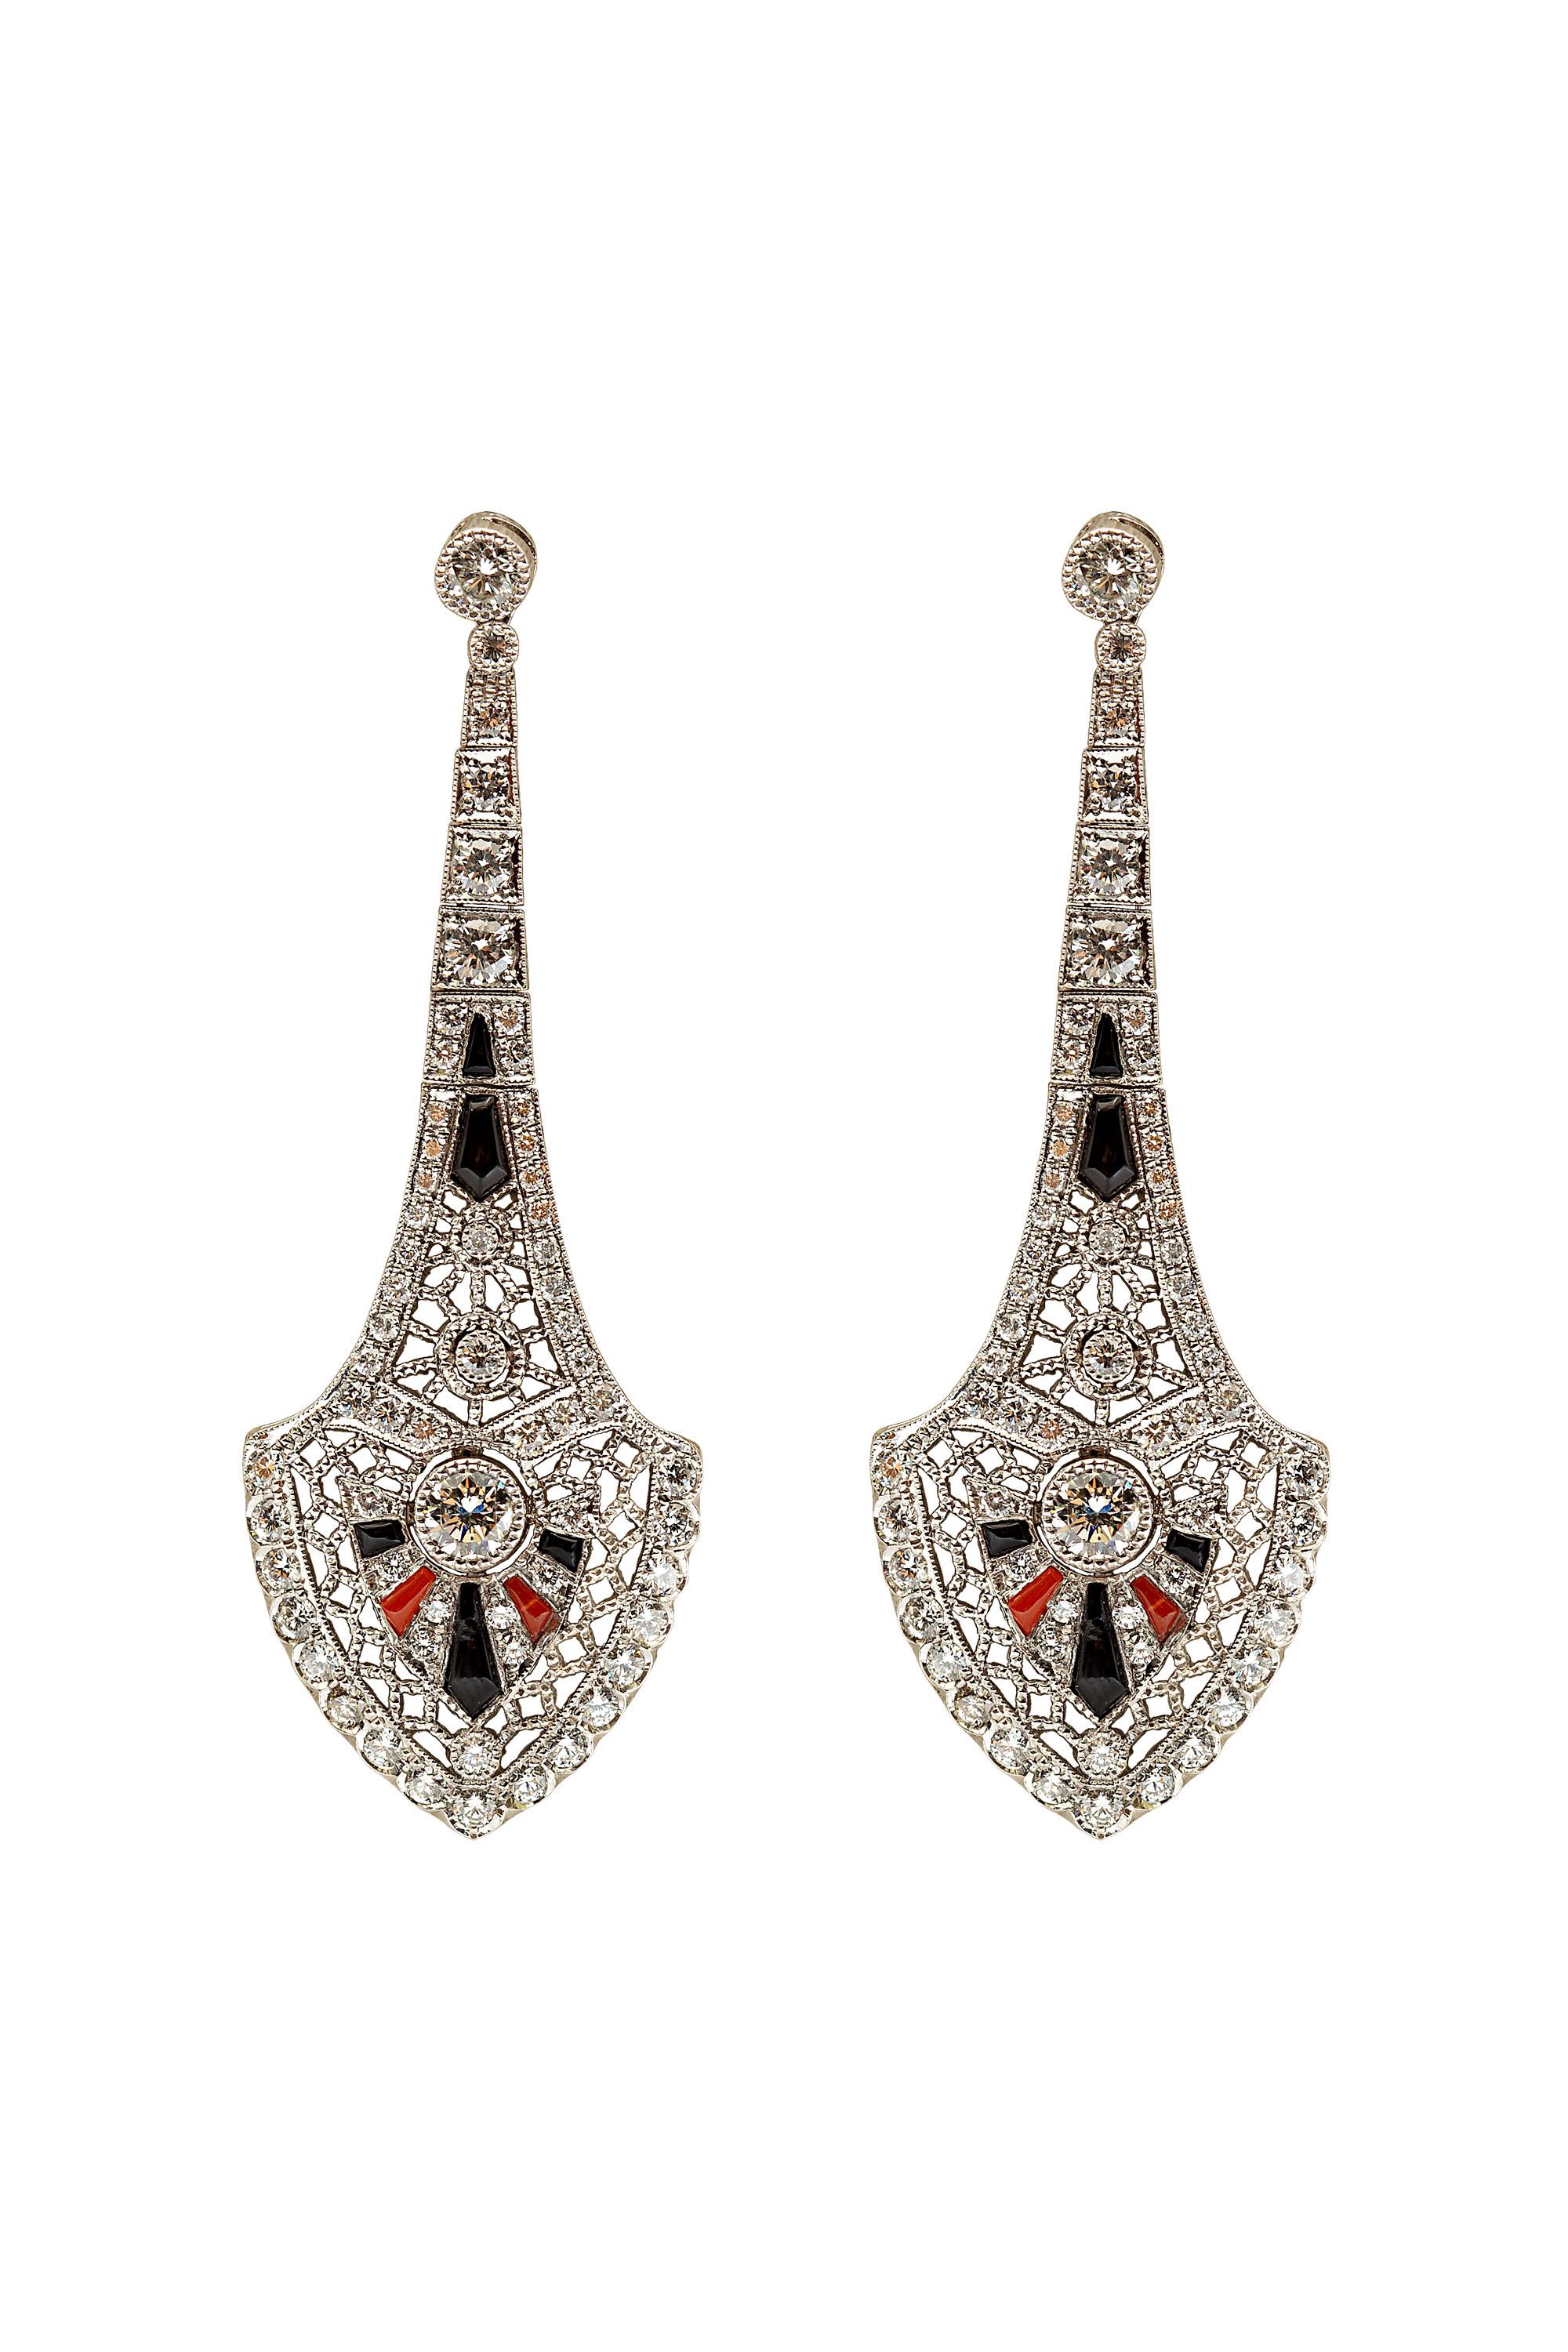 Intricate design and craftsmanship by Gems Are Forever, Inc, this gorgeous earrings are inspired by Art Deco era and crafted in platinum. The earrings have 4.70 carats diamond and are accented with black onyx and coral. Designed and finished by Gems